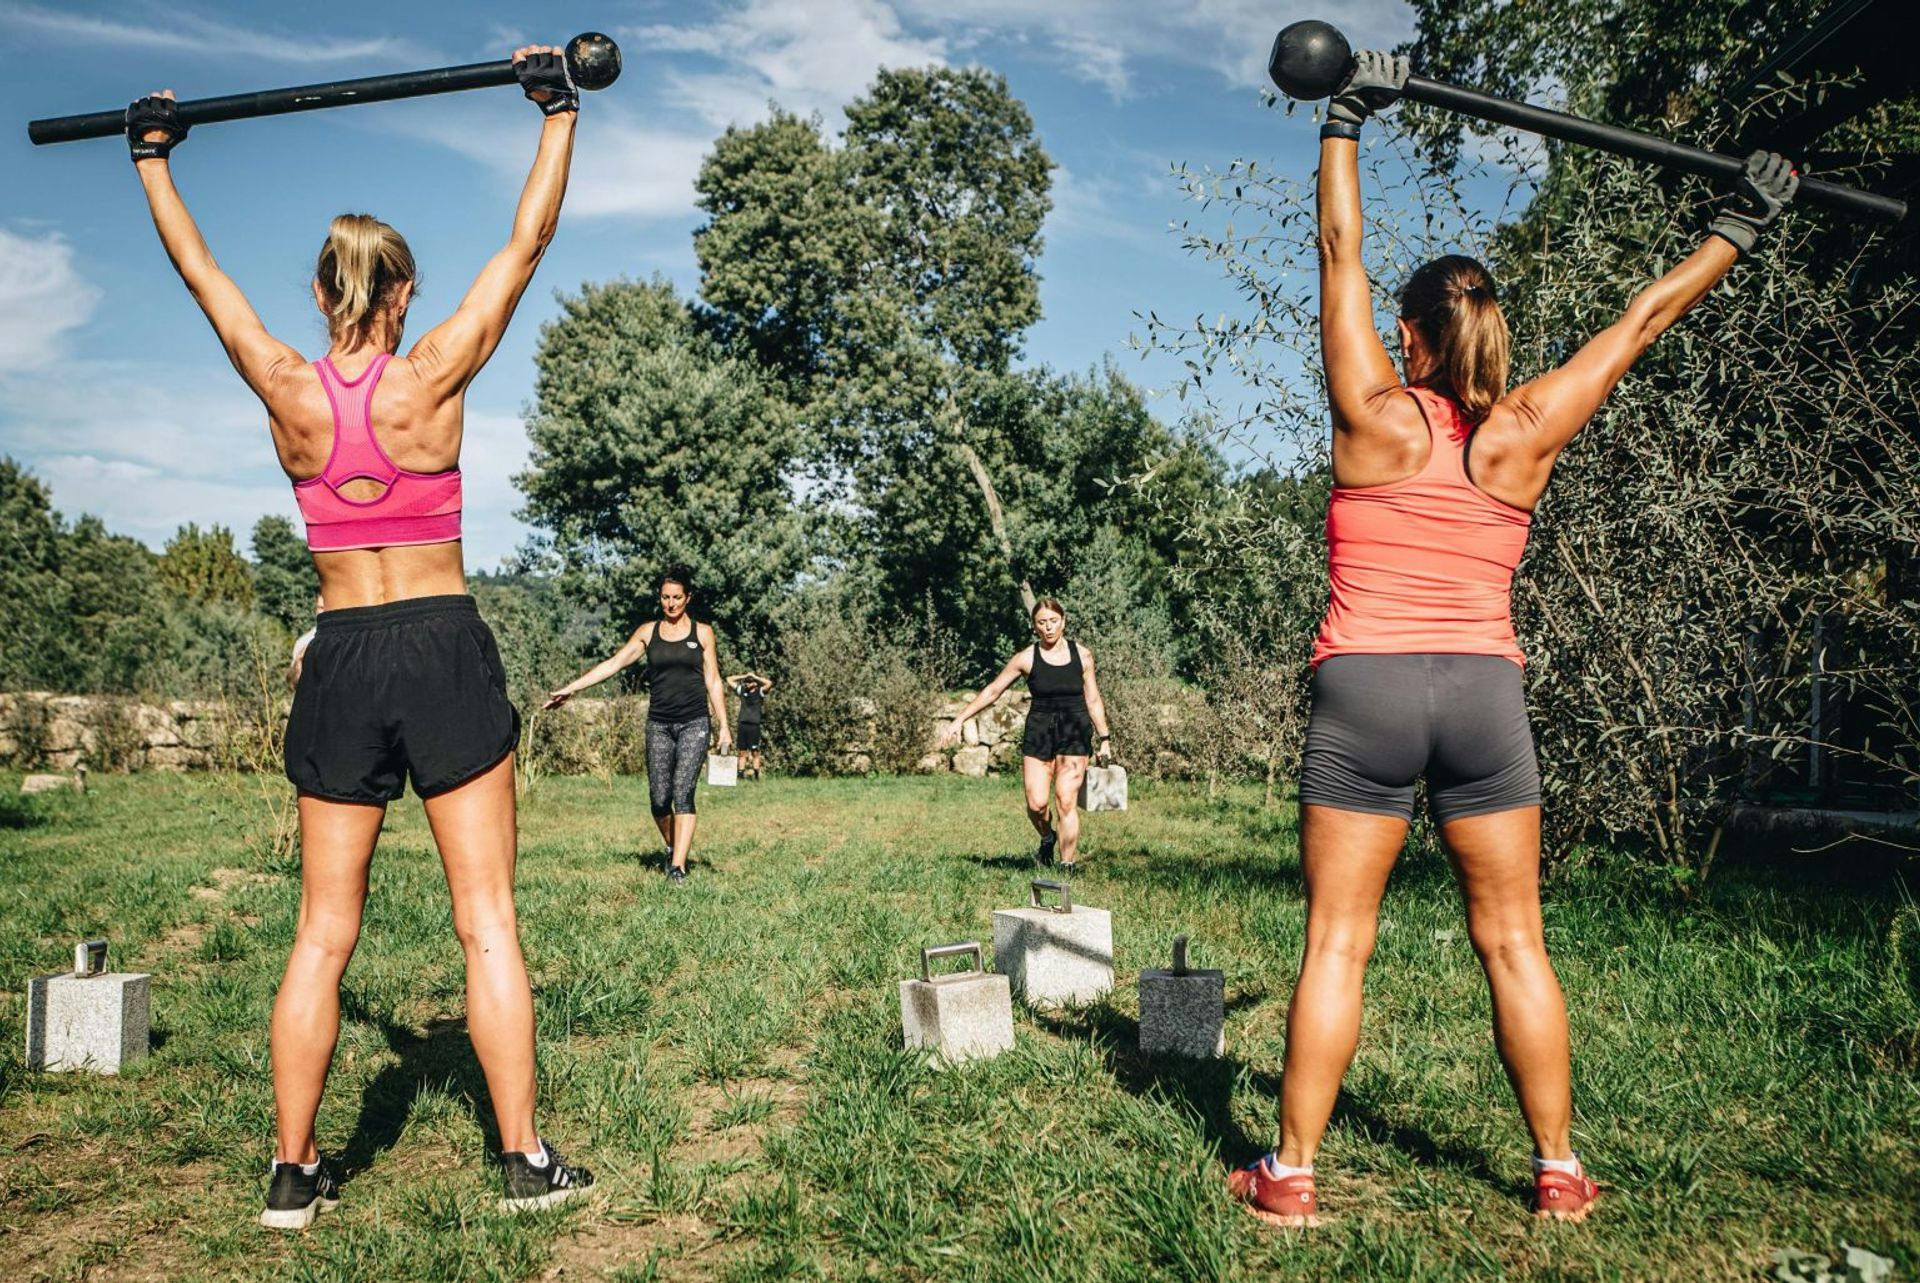 women lifting weights outside on grass